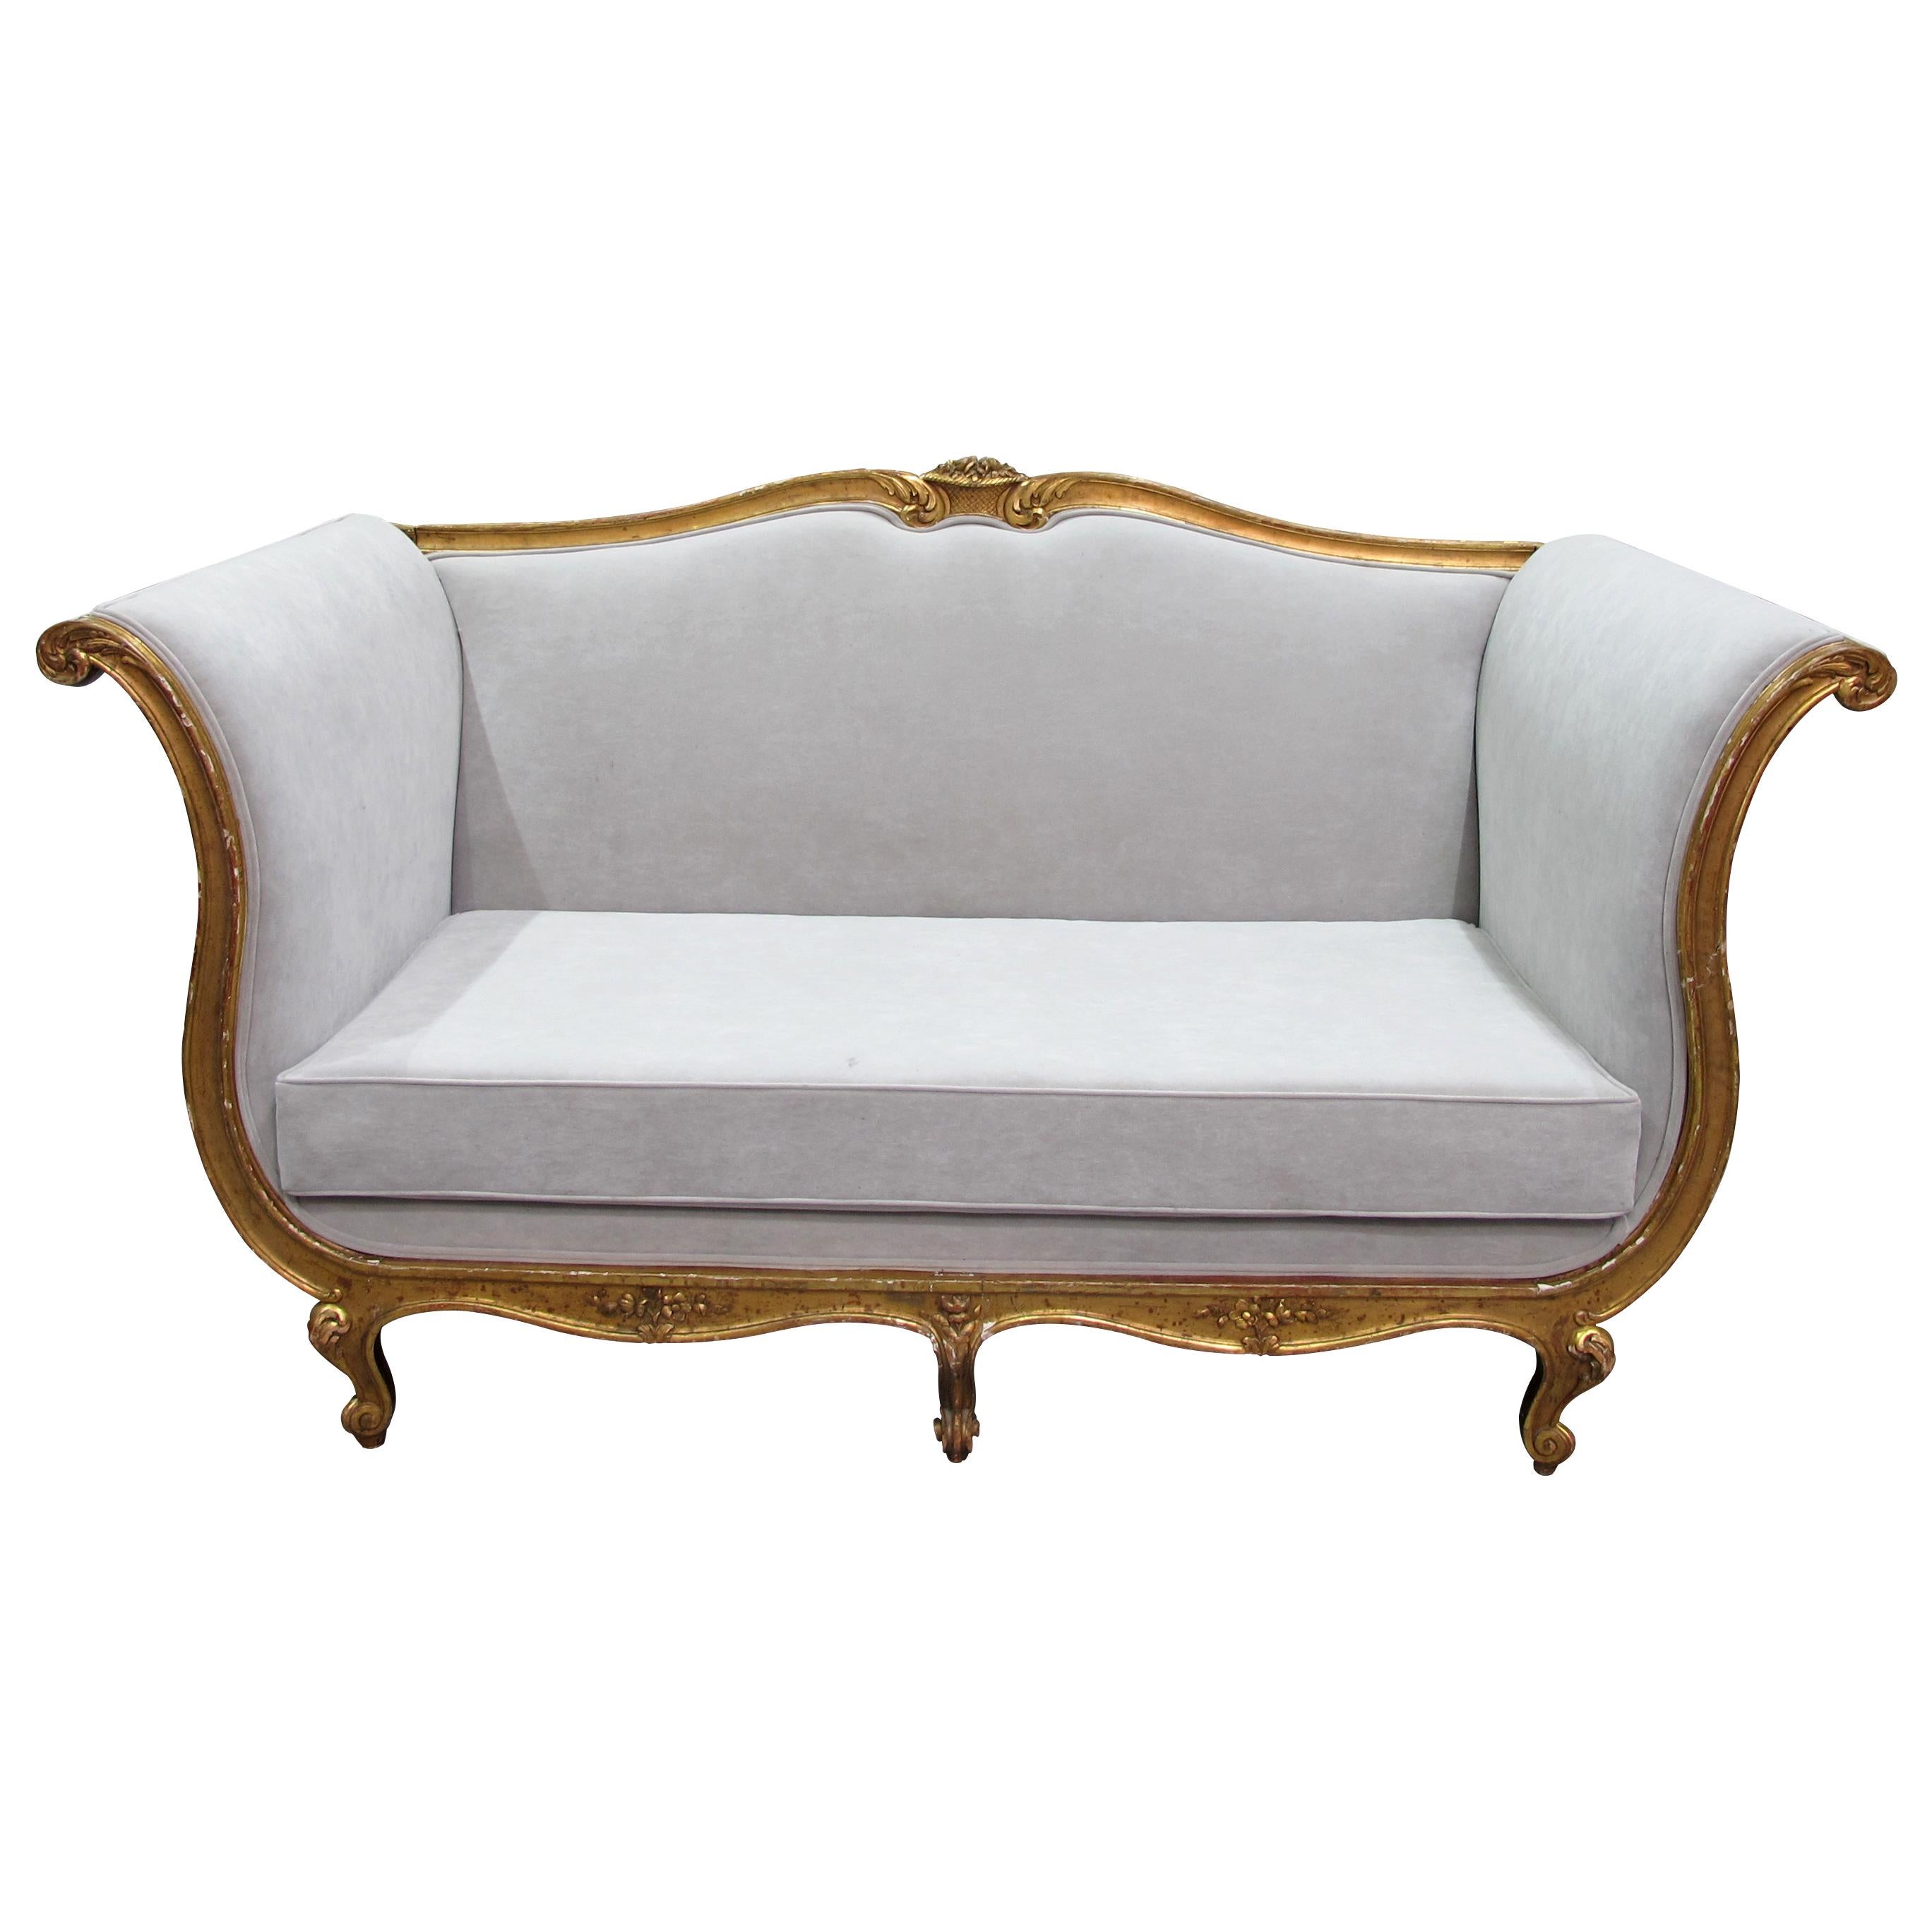 This is a very large and comfortable 19th-century sofa, newly upholstered with a hardwearing washable suede-like light grey fabric. This style of furniture was popular during the reign of King Louis XV of France. It is characterized by its curvy